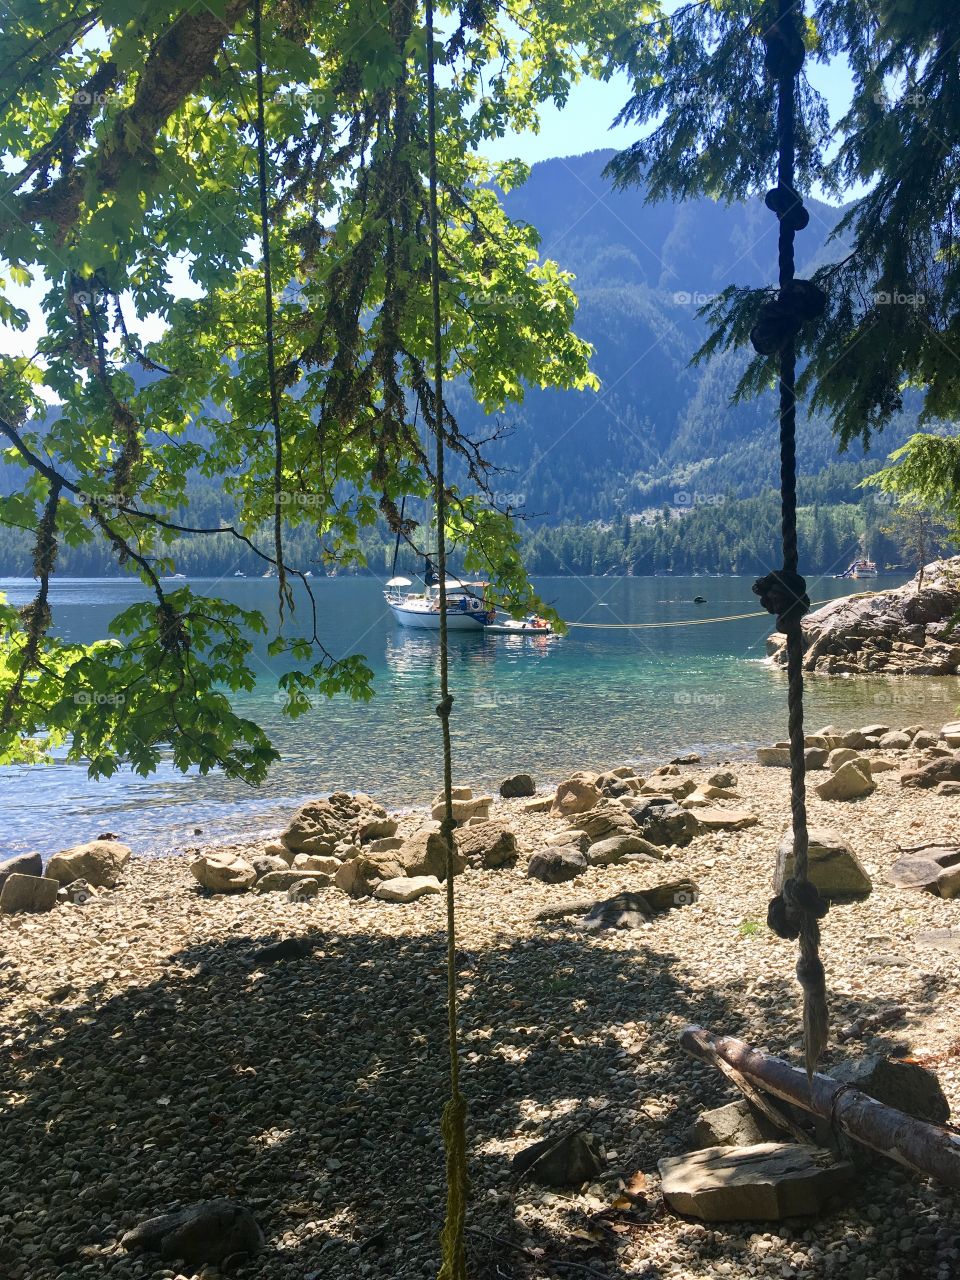 Rope-swings hanging from a lush green tree on a rocky beach in Canada. Clear blue water